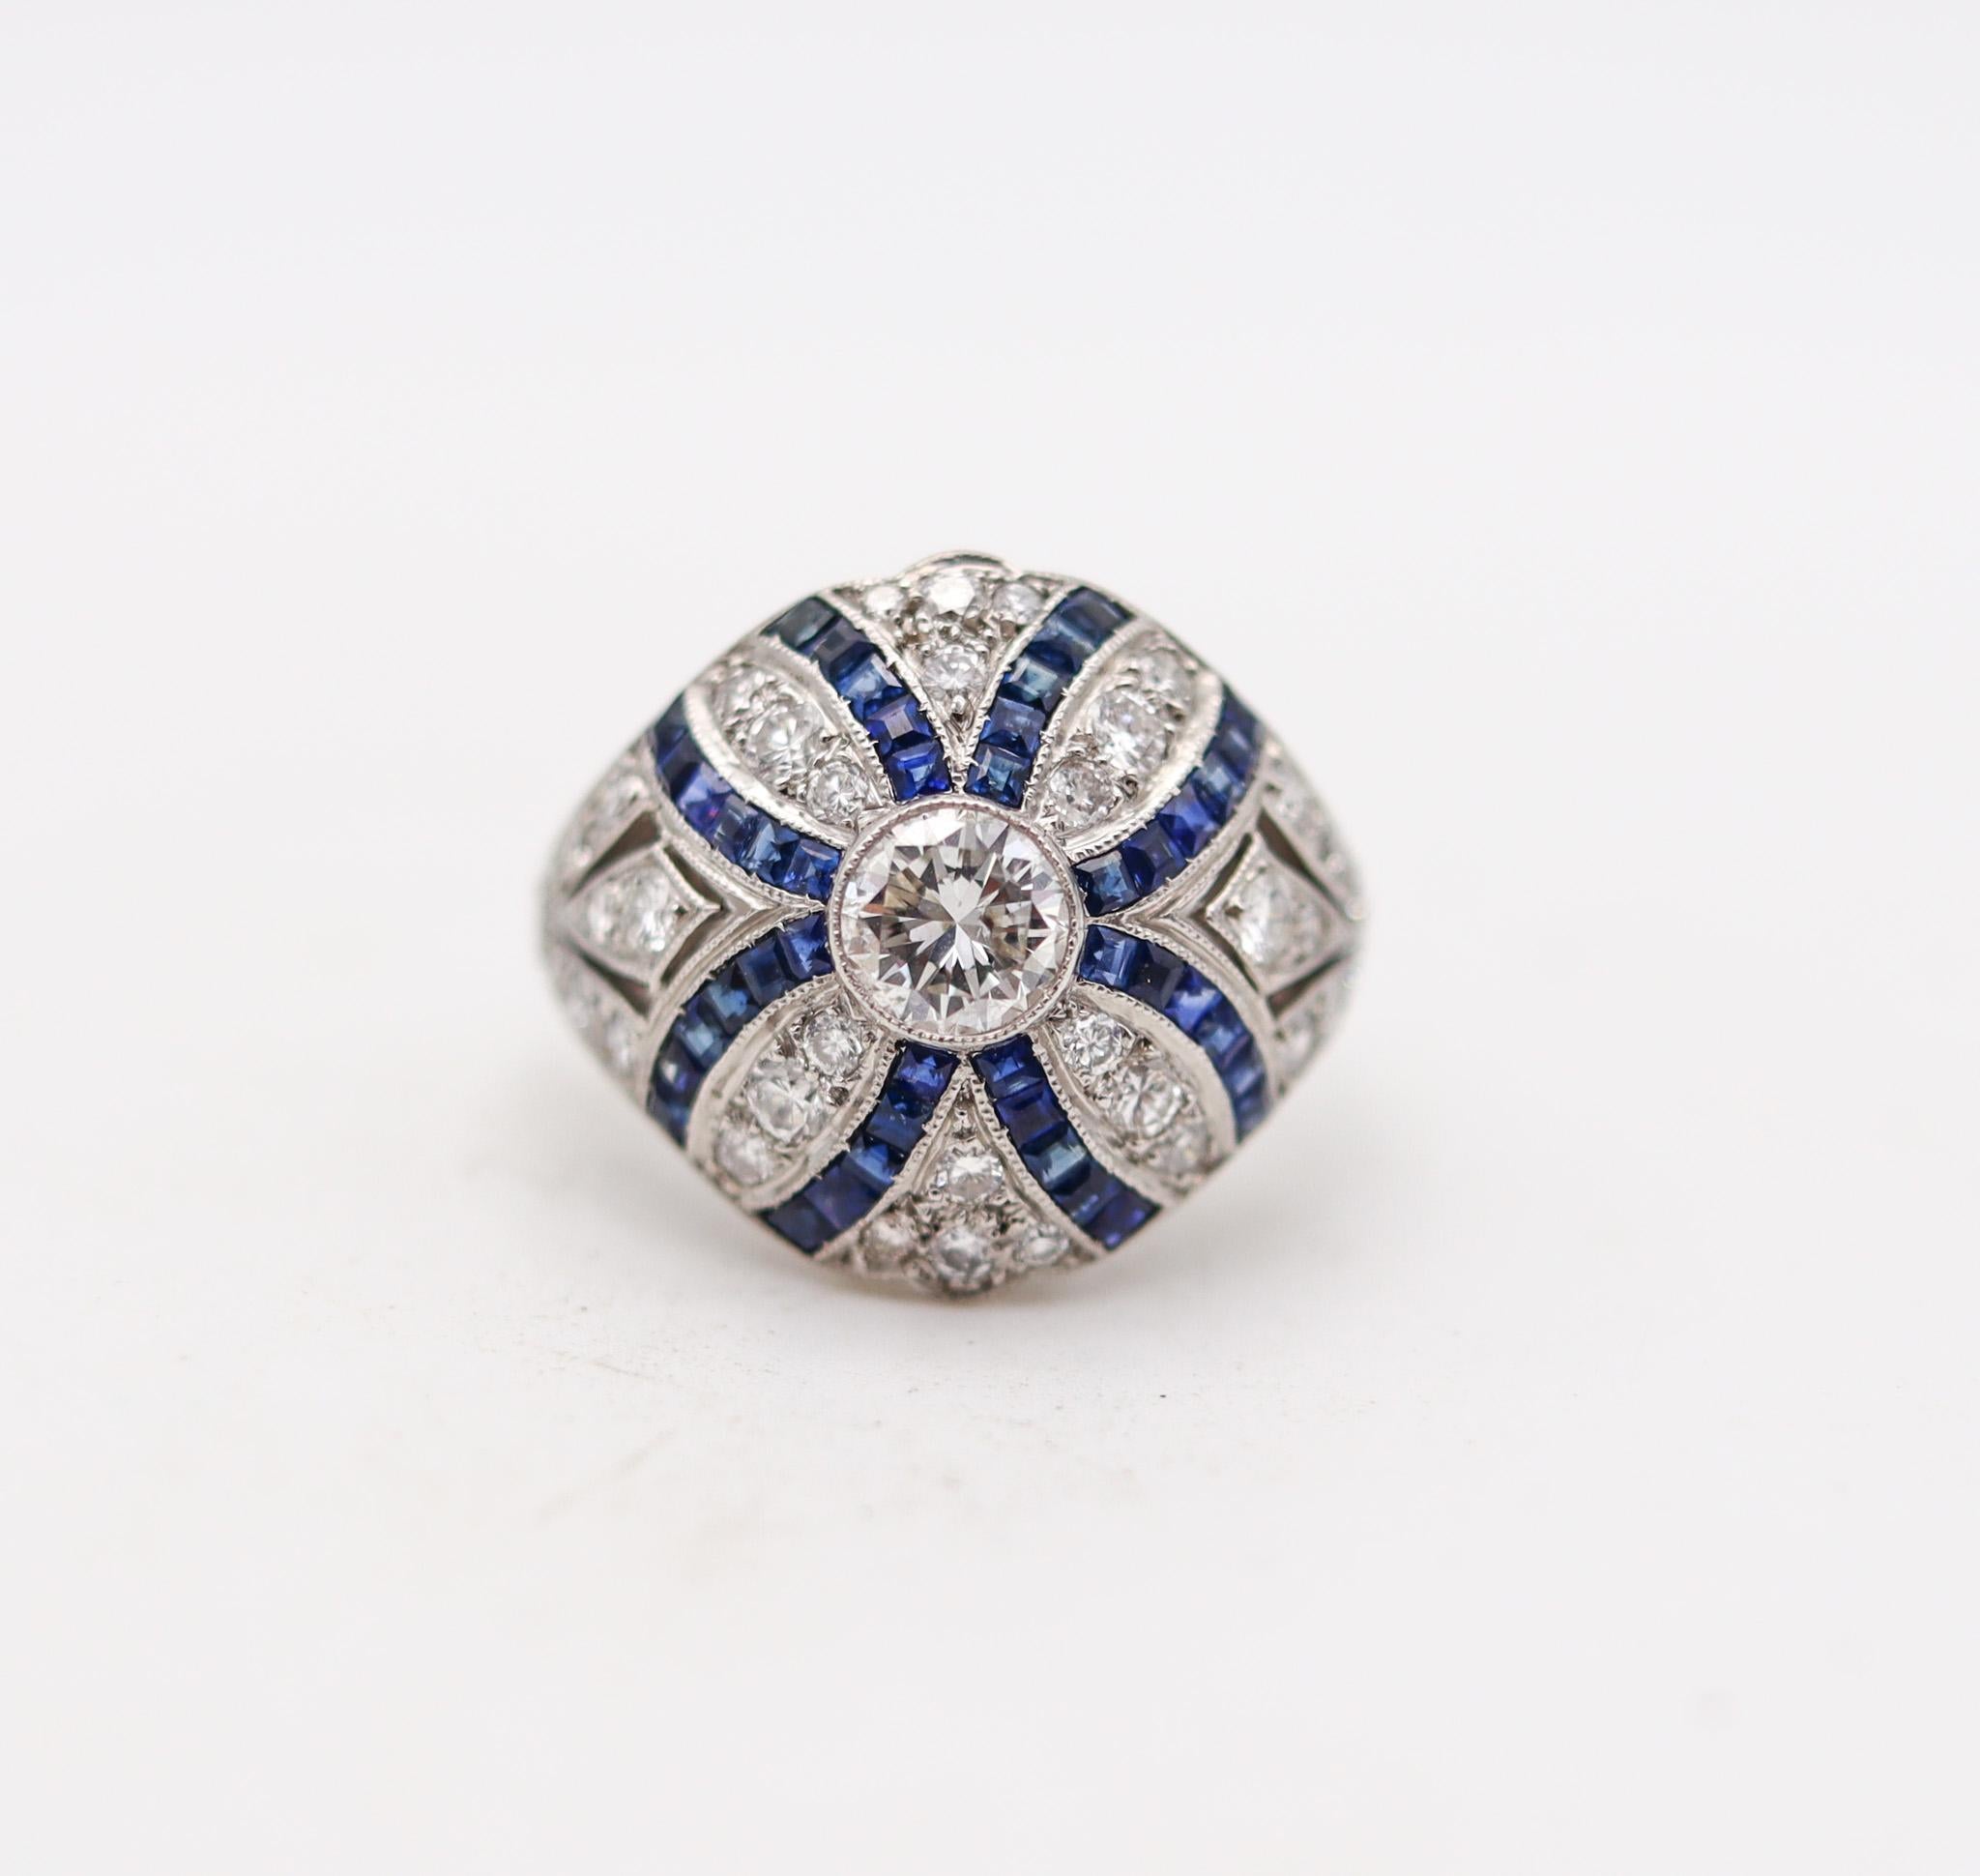 An art deco platinum ring with sapphires

Beautiful antique cocktail ring, created in America during the art deco period, back in the 1930. This beautiful ring was crafted in solid platinum and mount with a great selection of natural earth mined